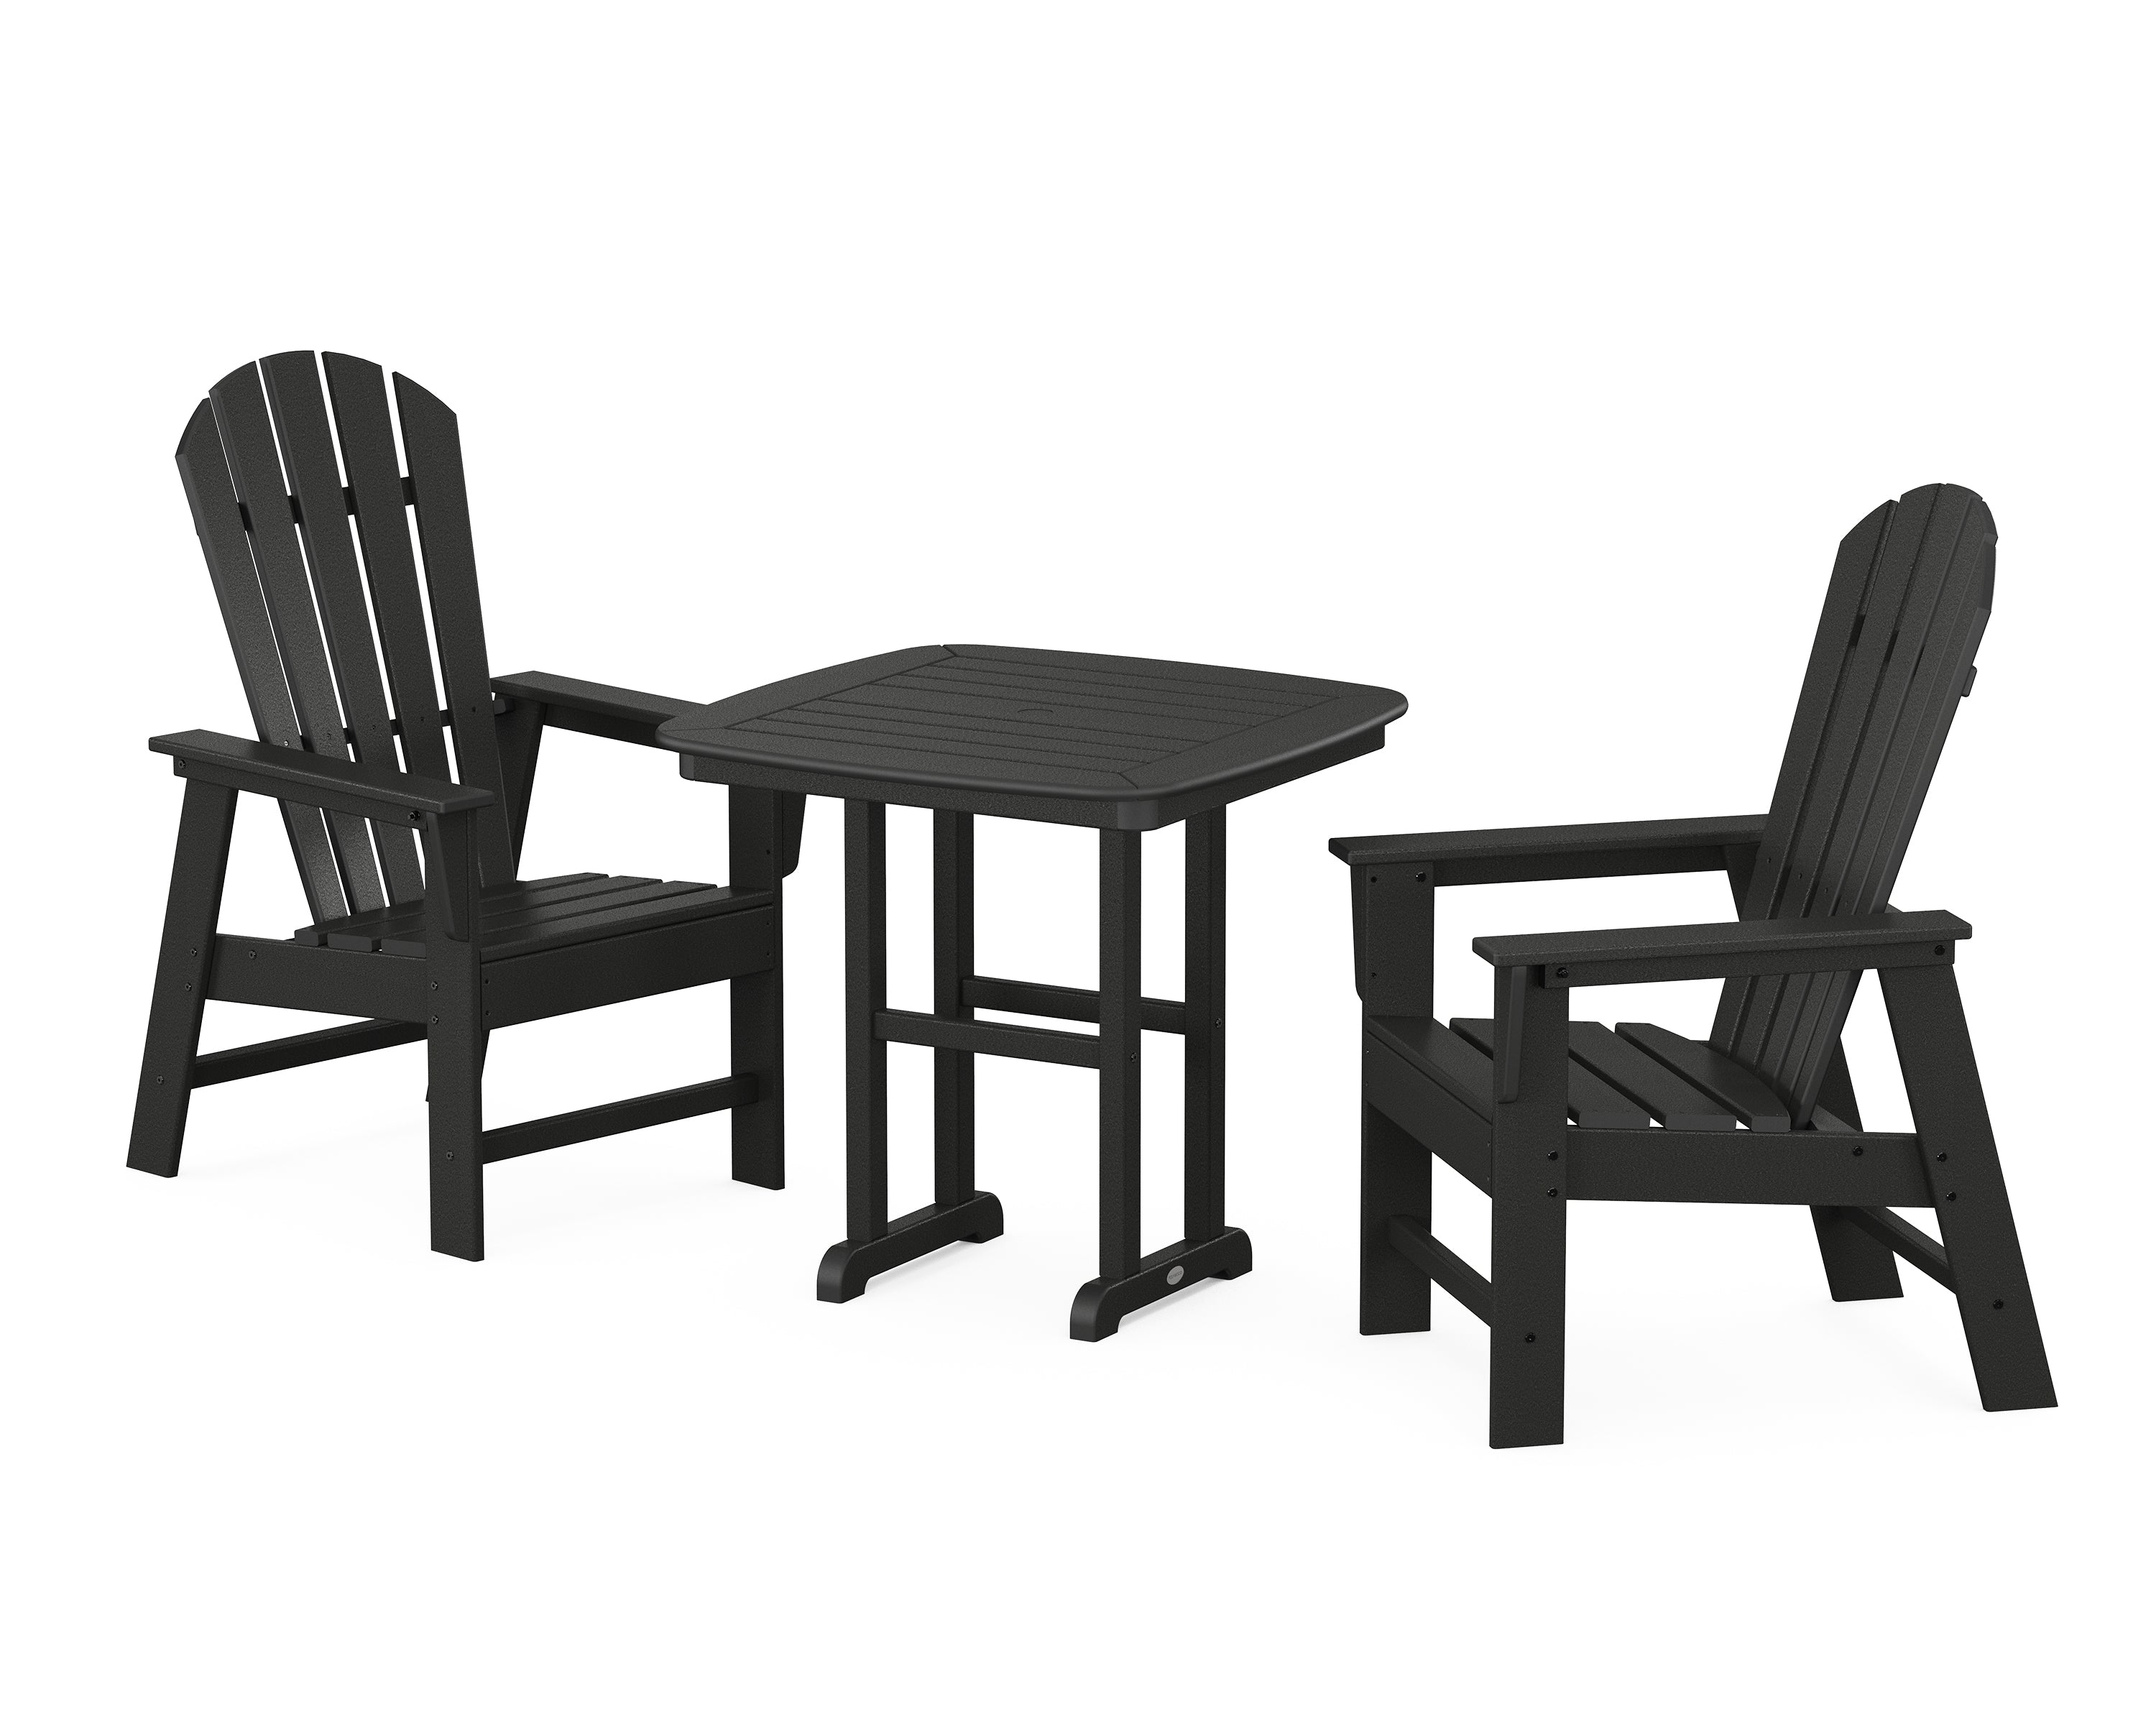 POLYWOOD® South Beach 3-Piece Dining Set in Black